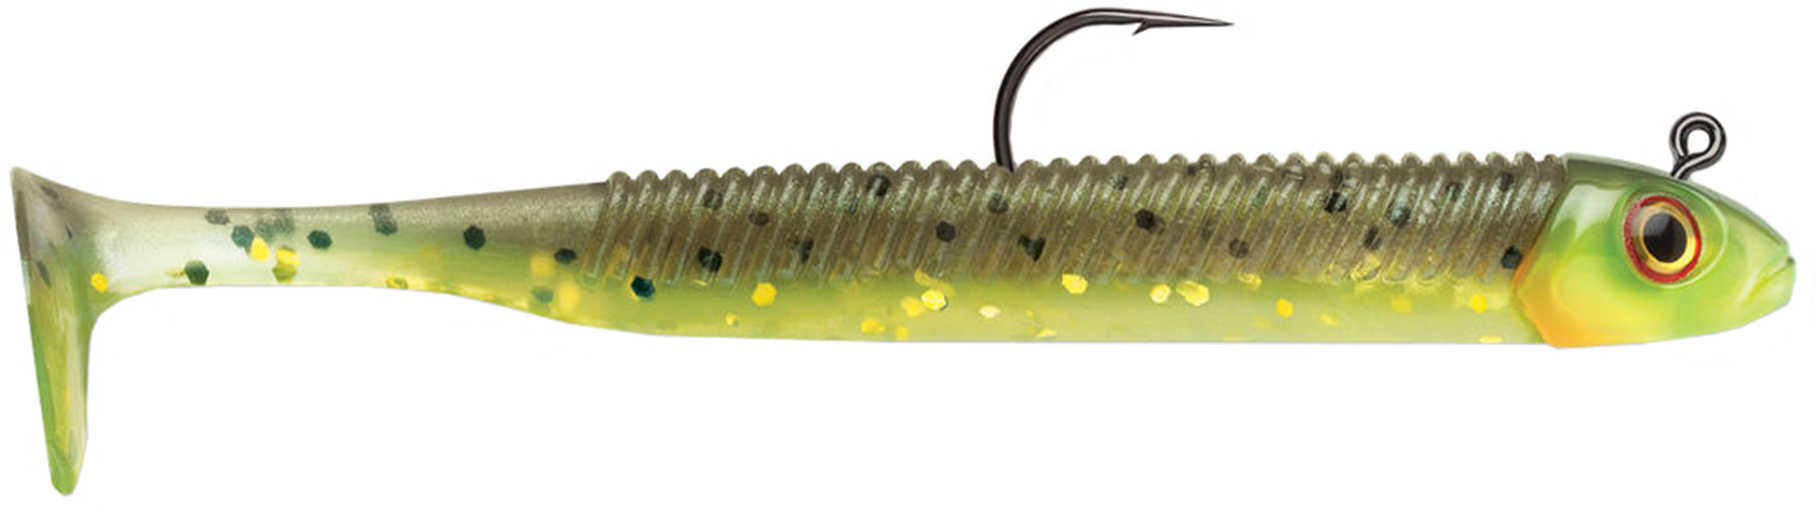 Storm 360GT Searchbait Lure 4.5 Inches 1/4 Ounce, Hot Olive, Oack Of 1 Md: SBM45HO-14J